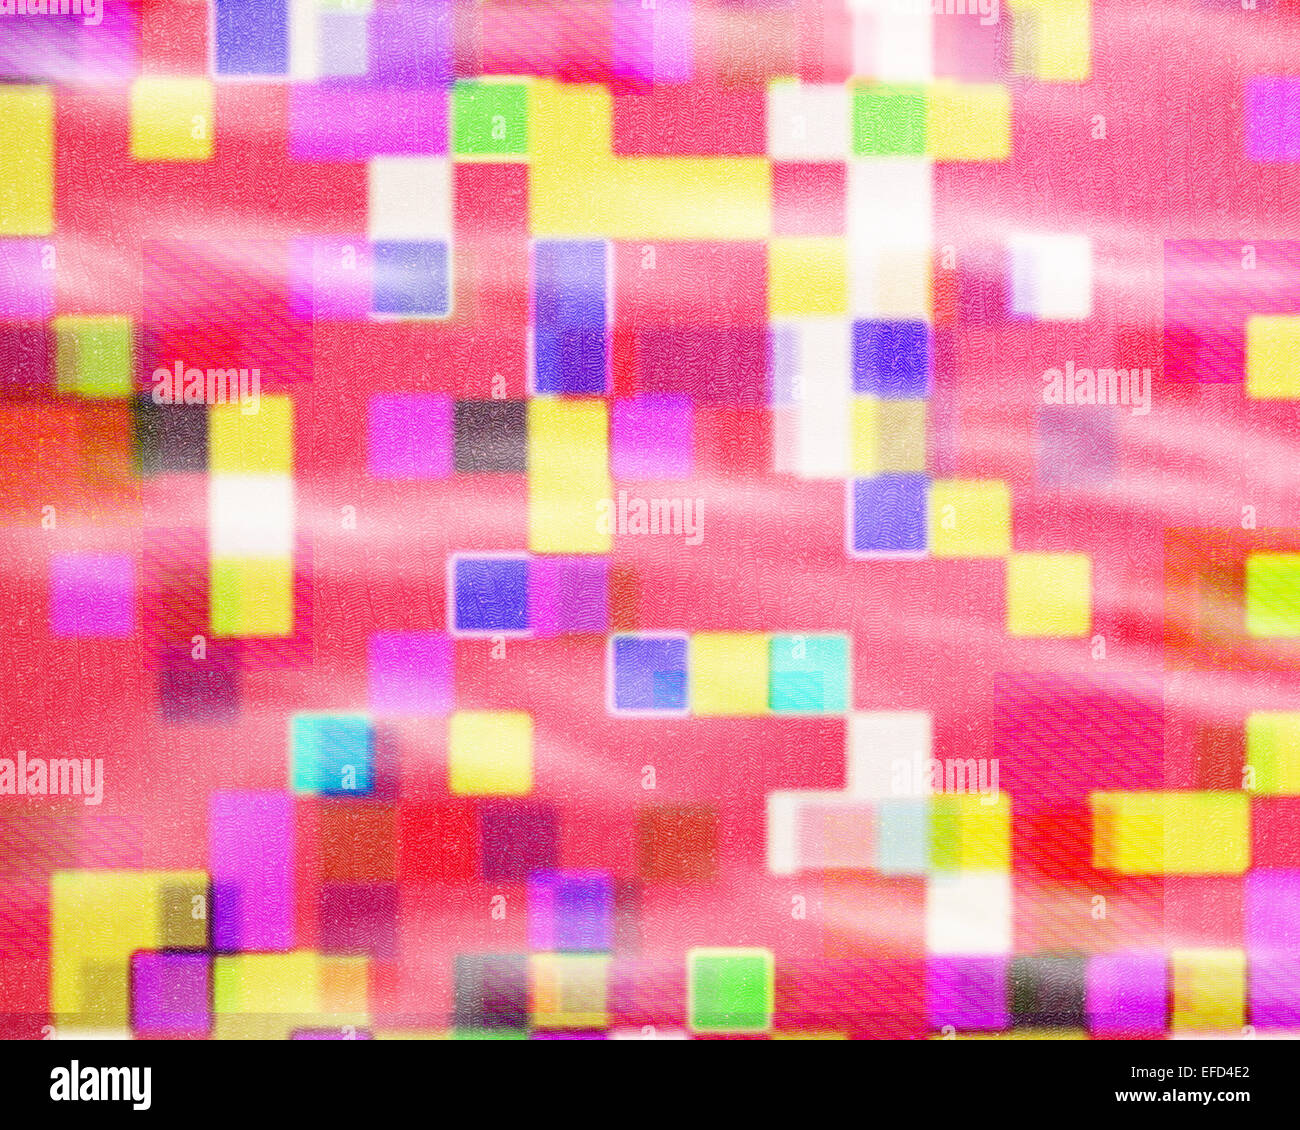 An unusual background image consisting of colored squares on a patterned background suggesting wrapping paper etc. Stock Photo